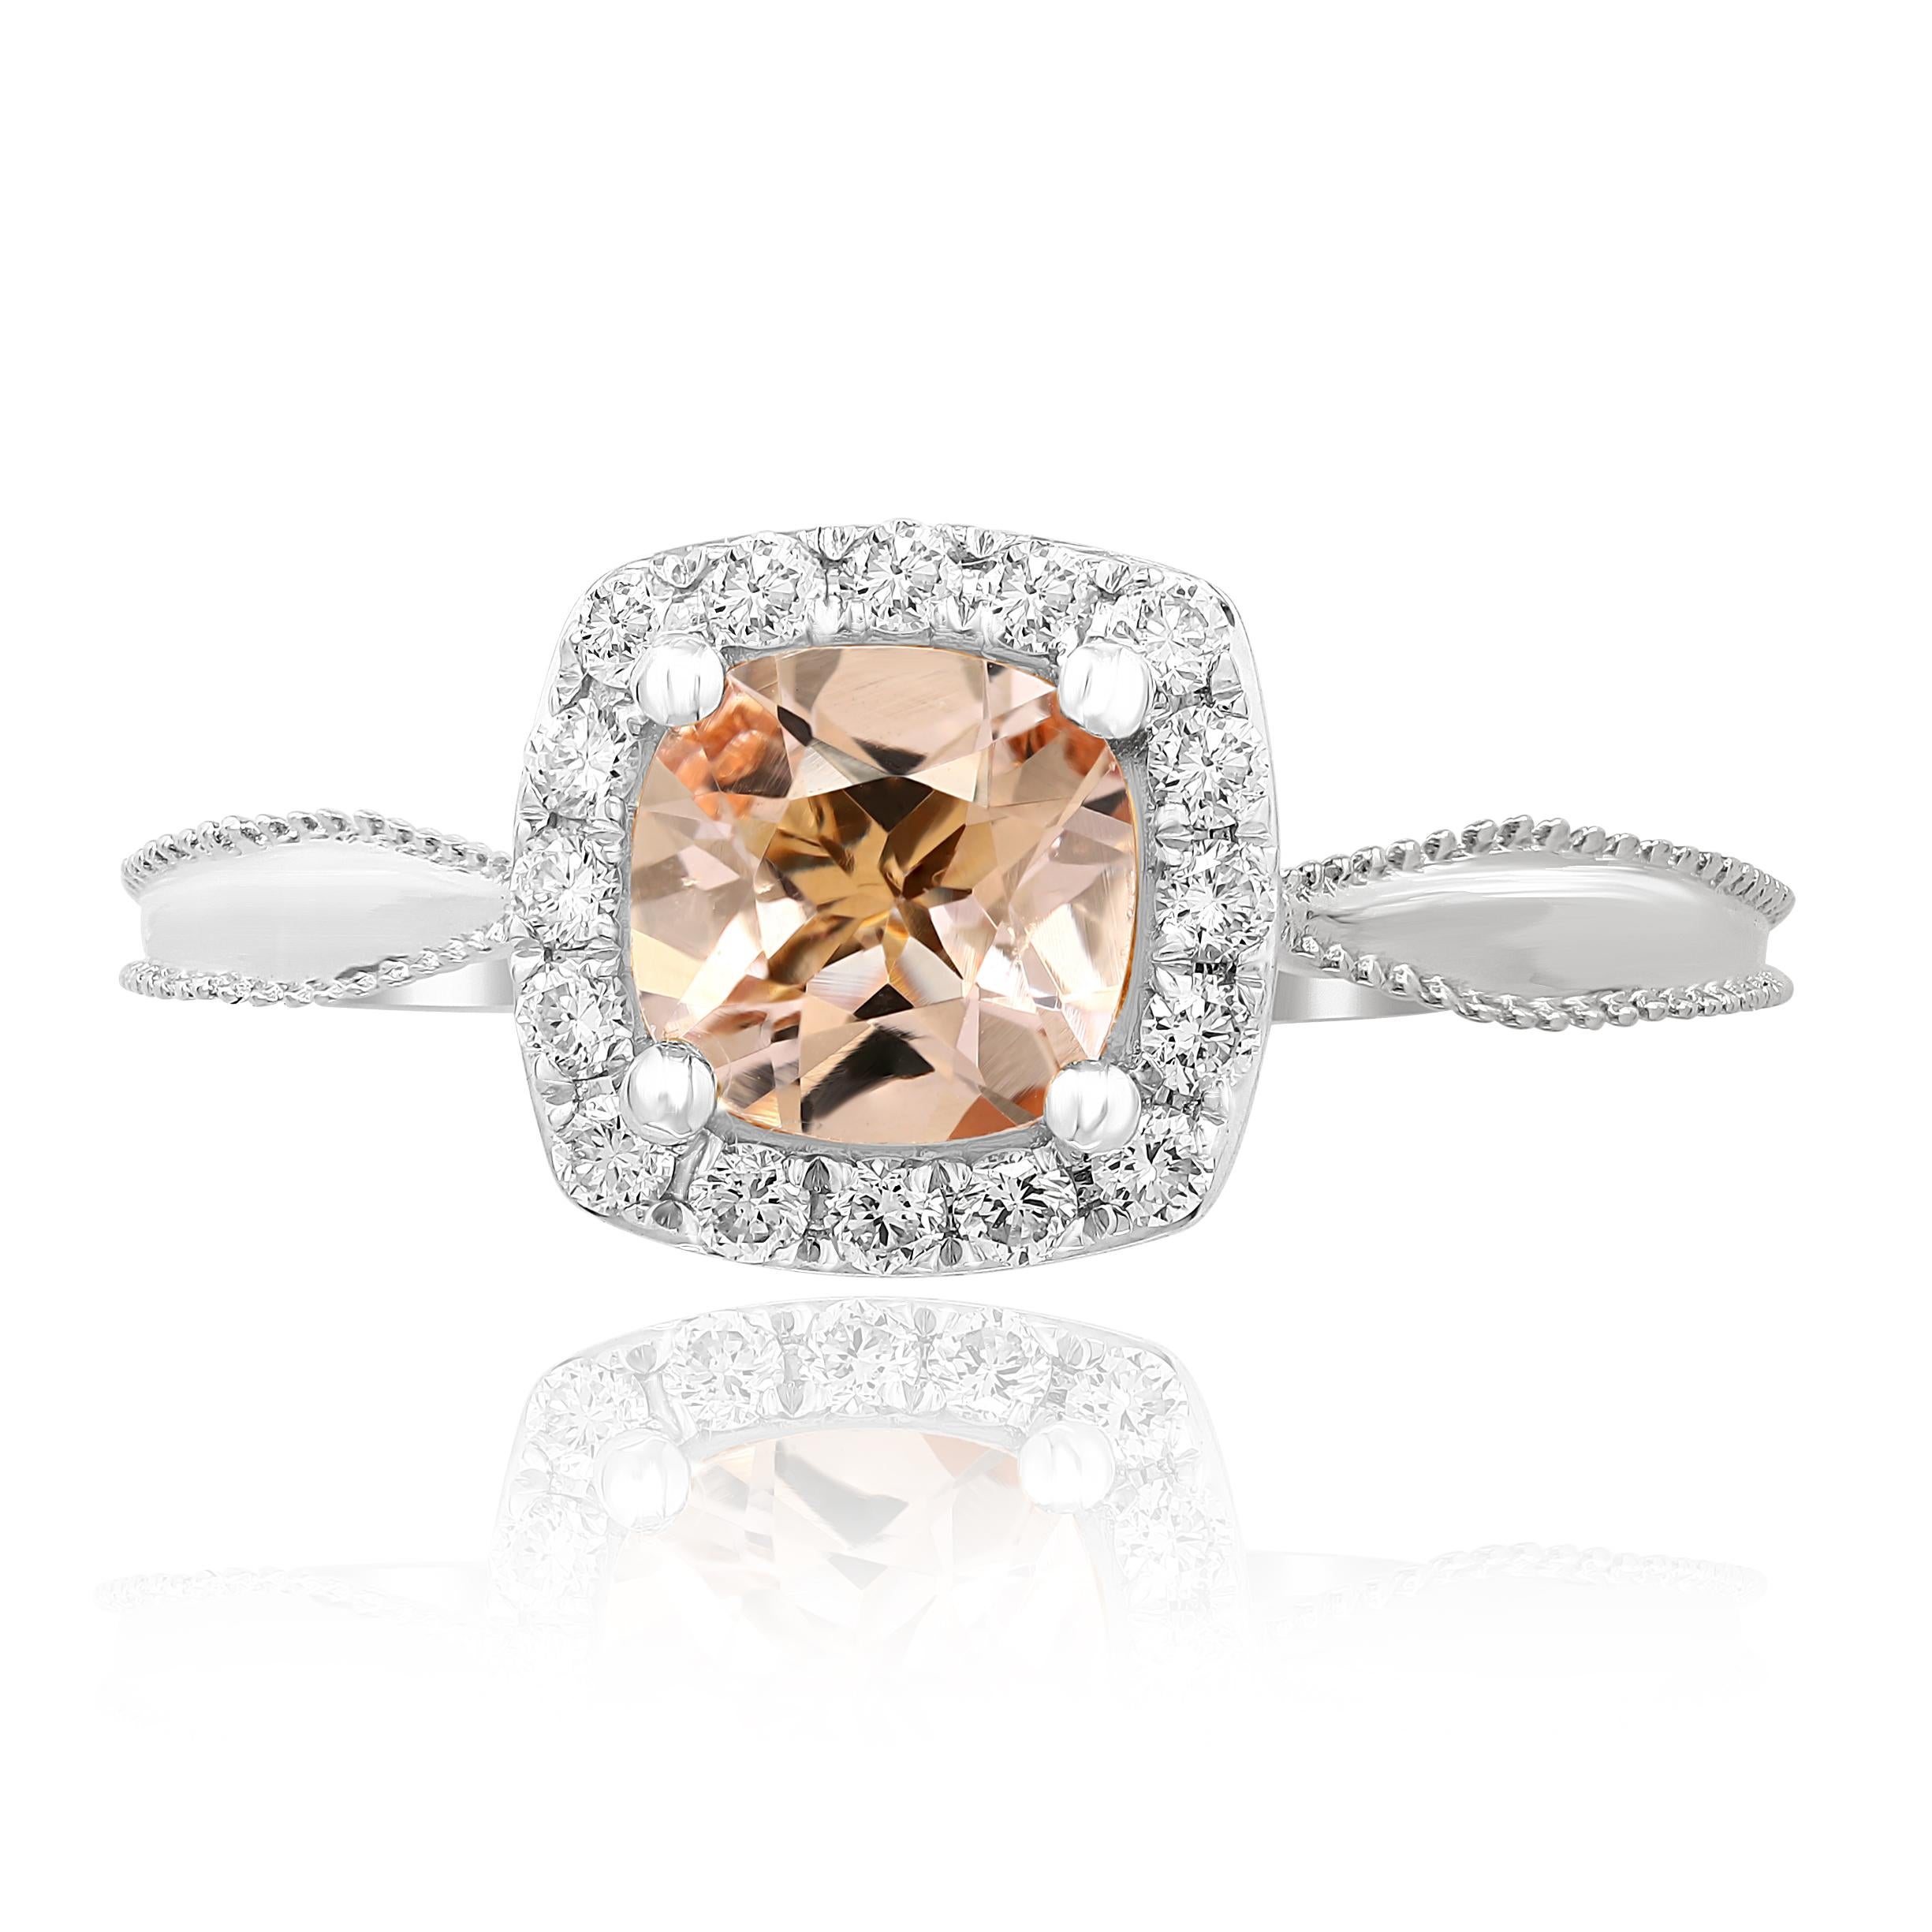 This classic Morganite Ring has a Cushion Cut 0.78 Carat Morganite as its center and is surrounded by 16 Round Cut Diamonds that weigh 0.25 Carats in 18K White Gold.